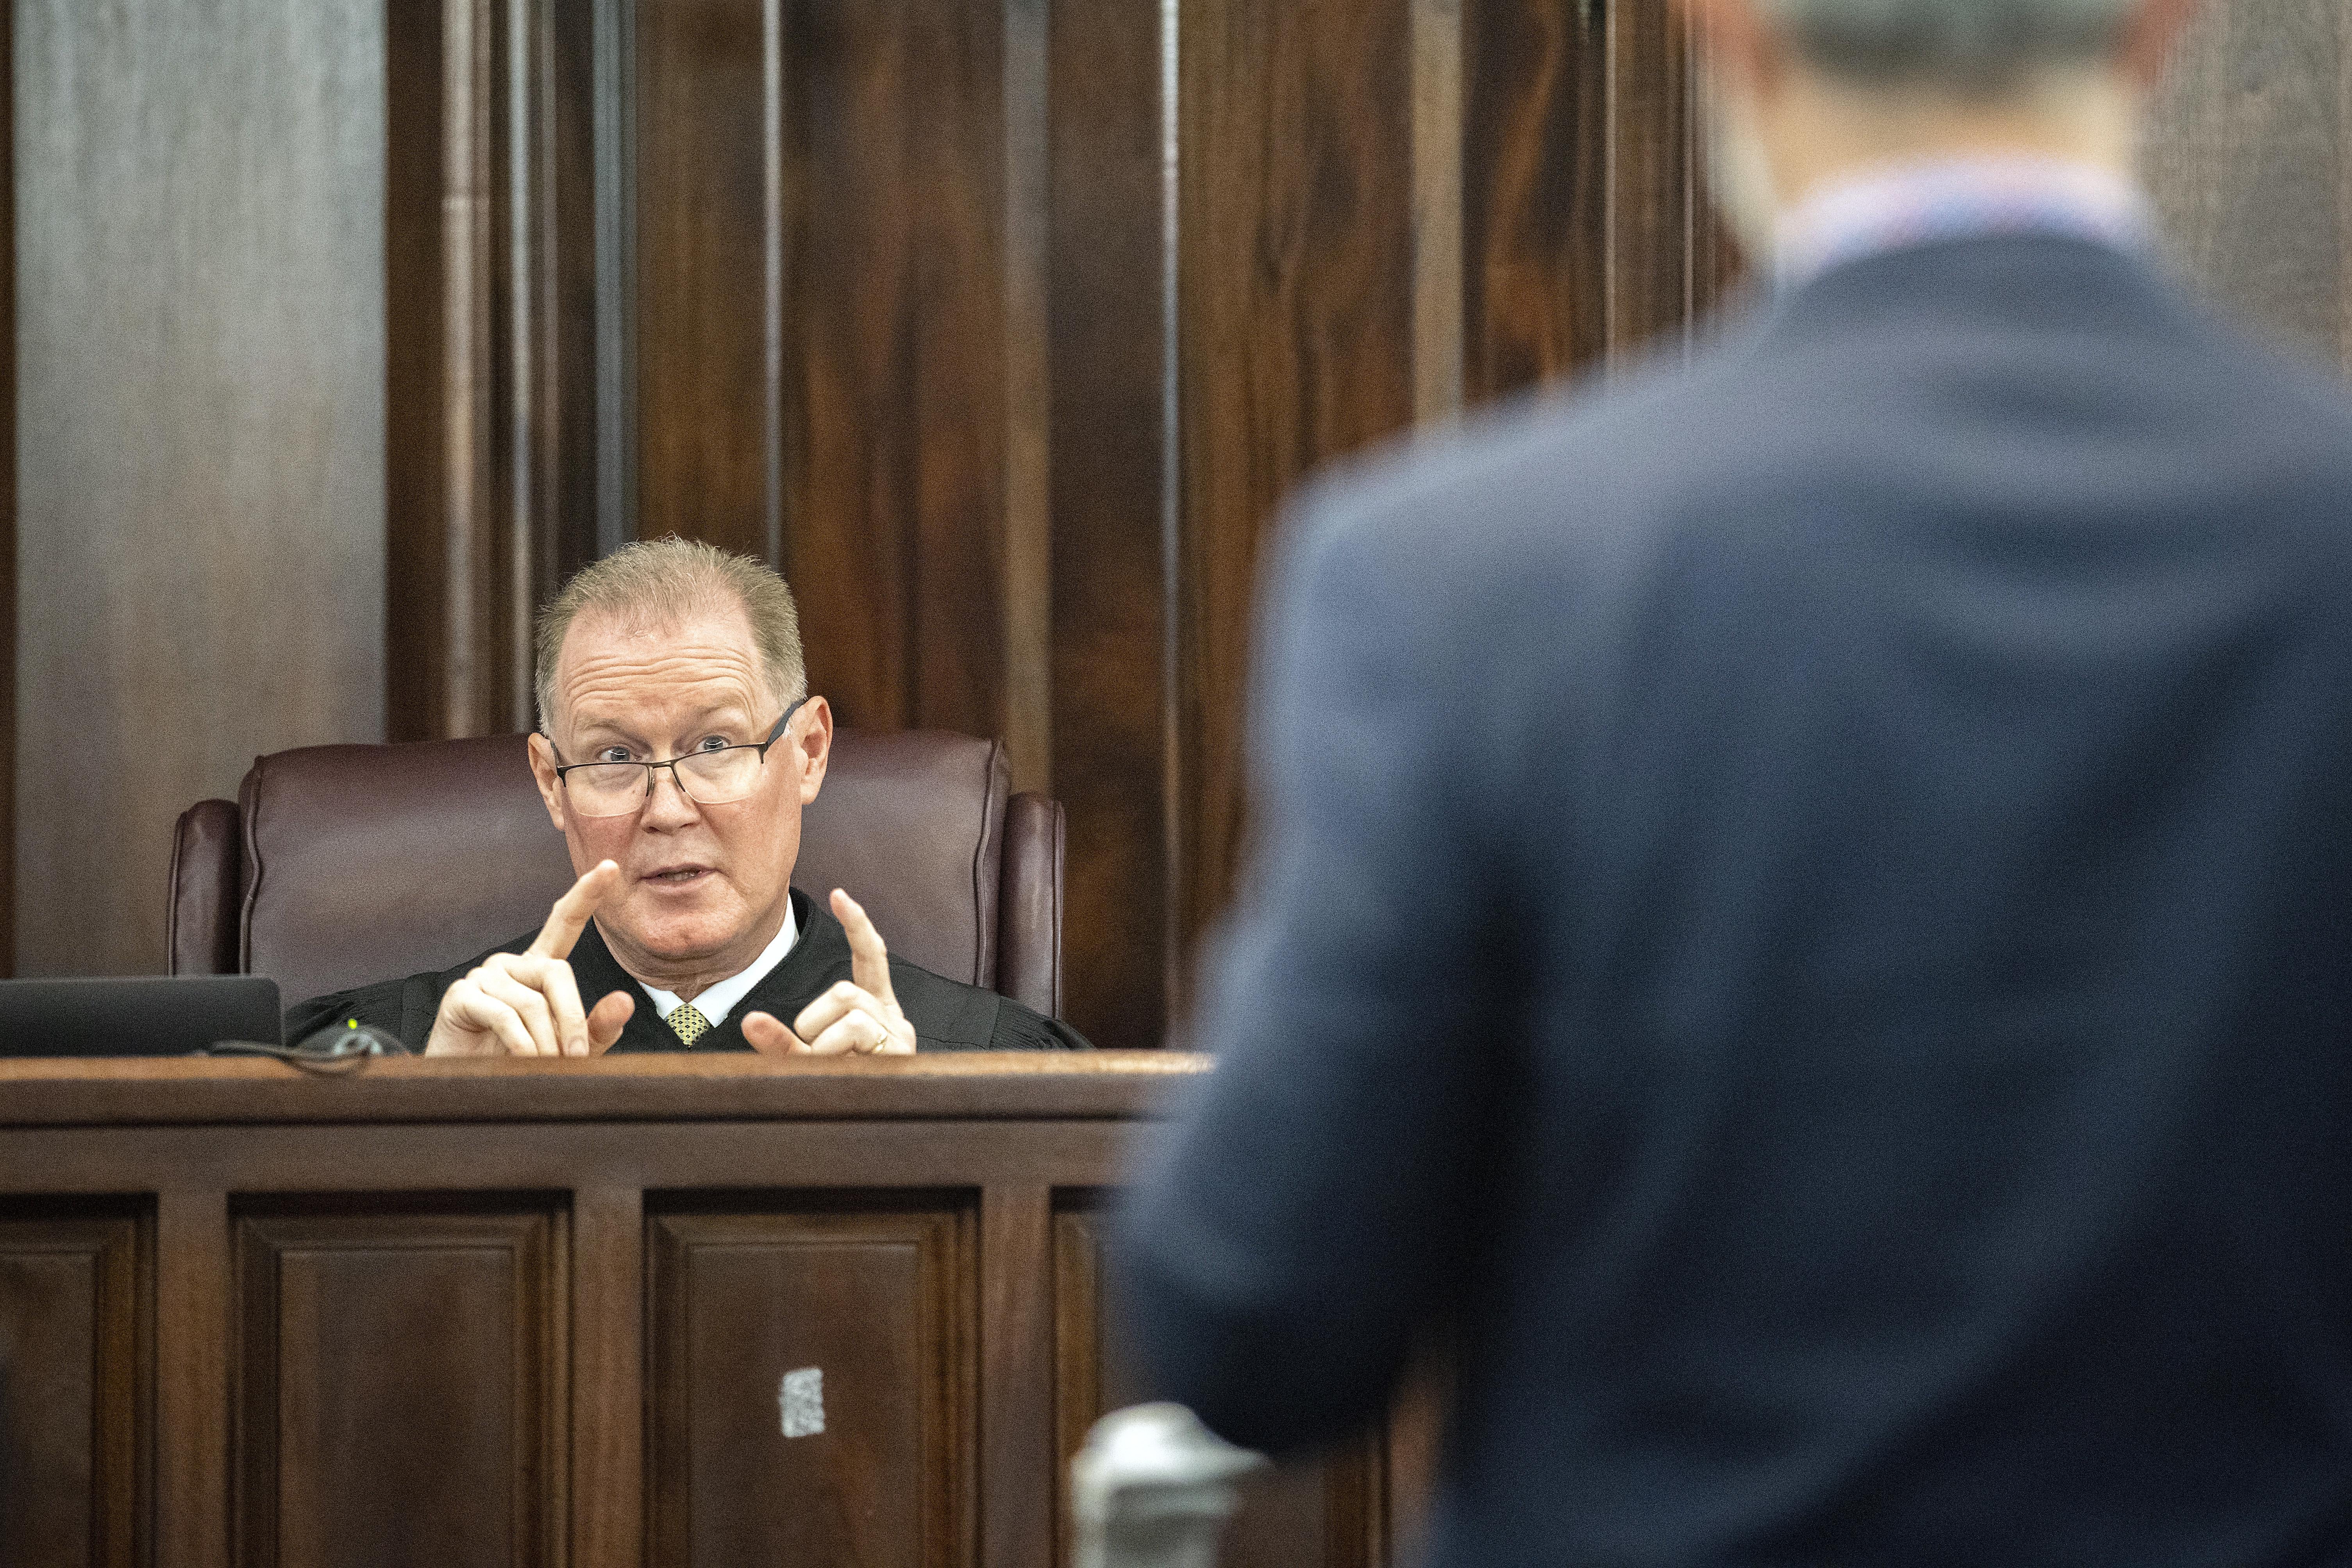 Judge sitting on the bench gestures as he speaks to a man standing in the foreground